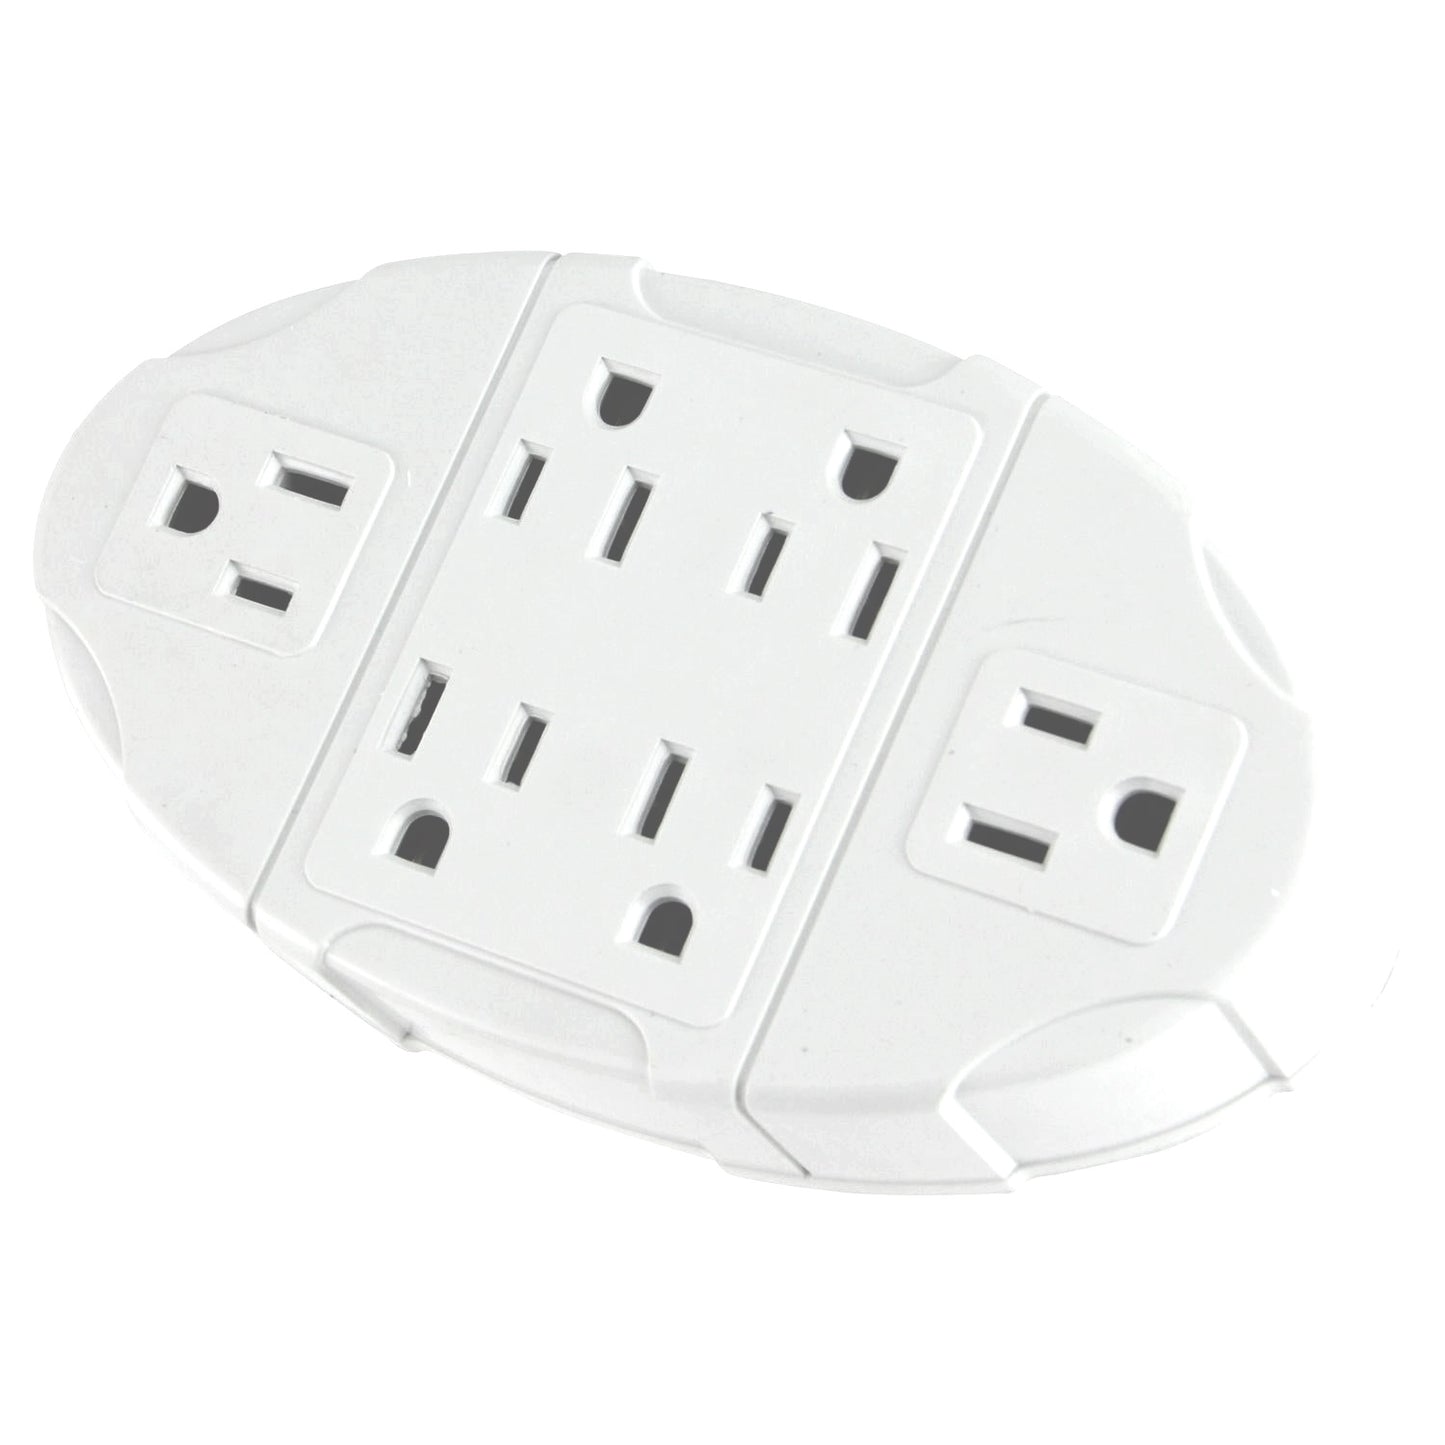 6 Outlet Wall Adapter 6 grounded 3-prong outlets 125 volts, 15 amps, 1875 watts